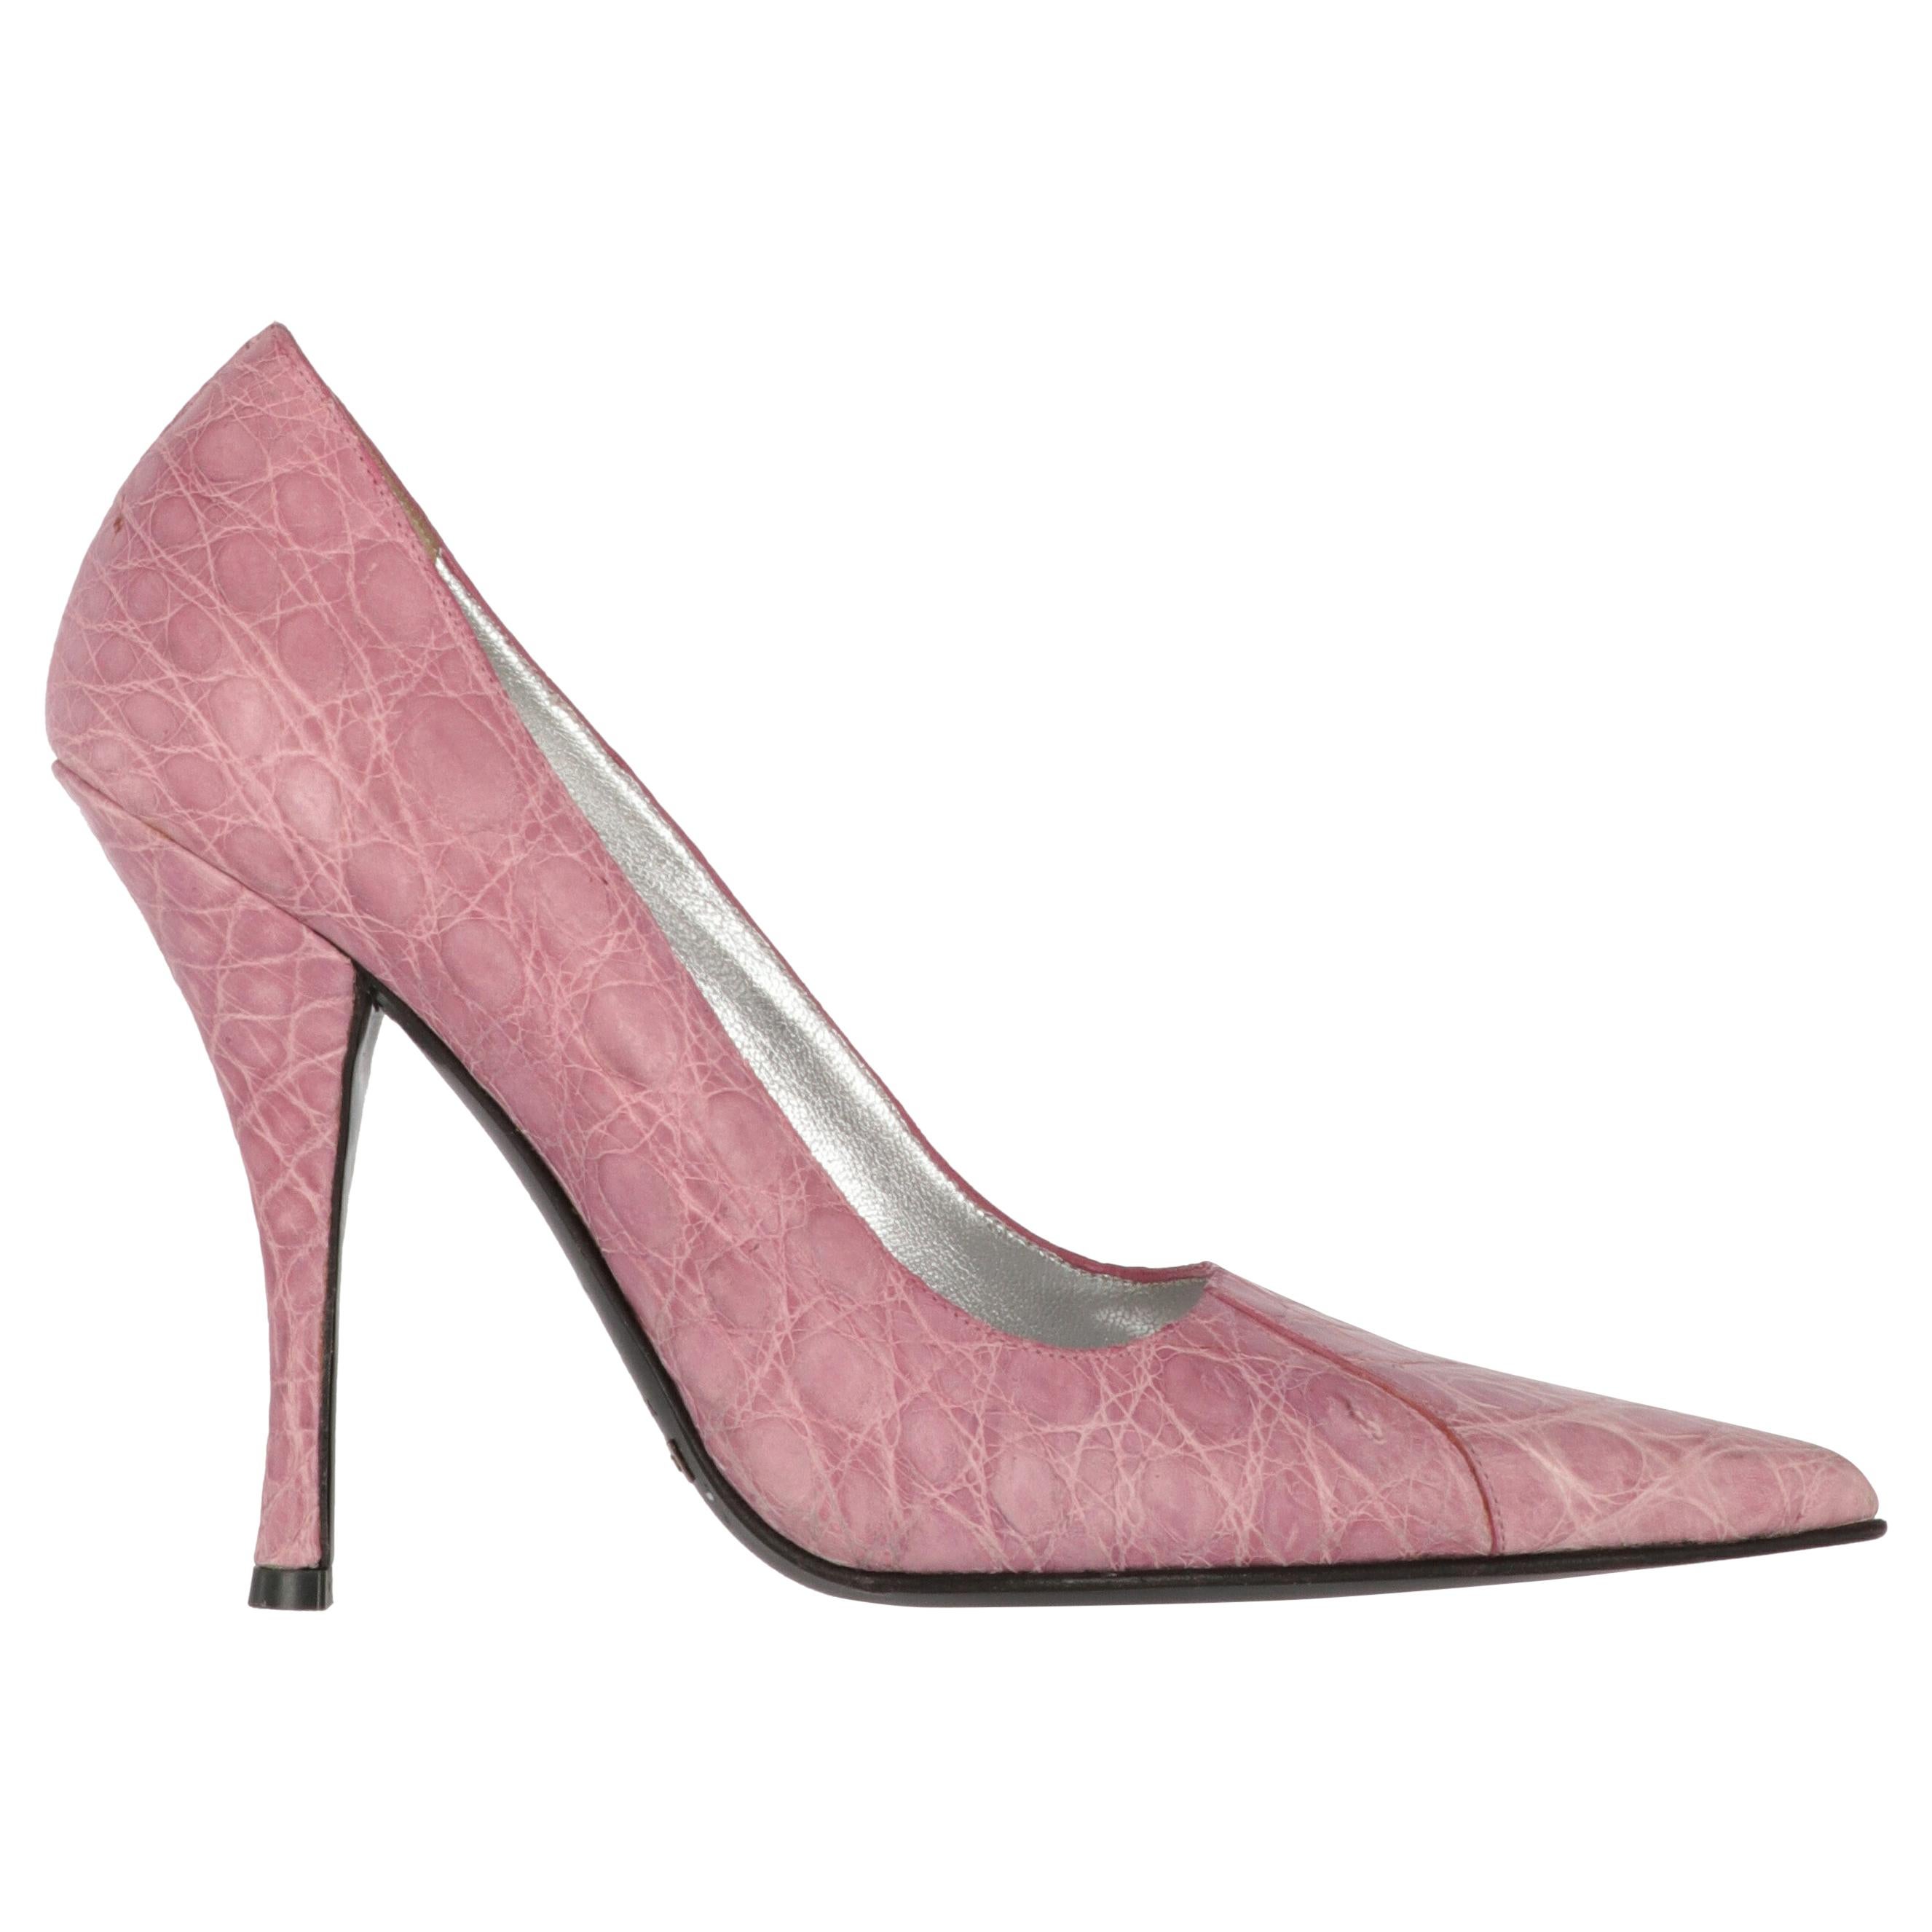 2000s Dolce & Gabbana Pink Leather Pumps